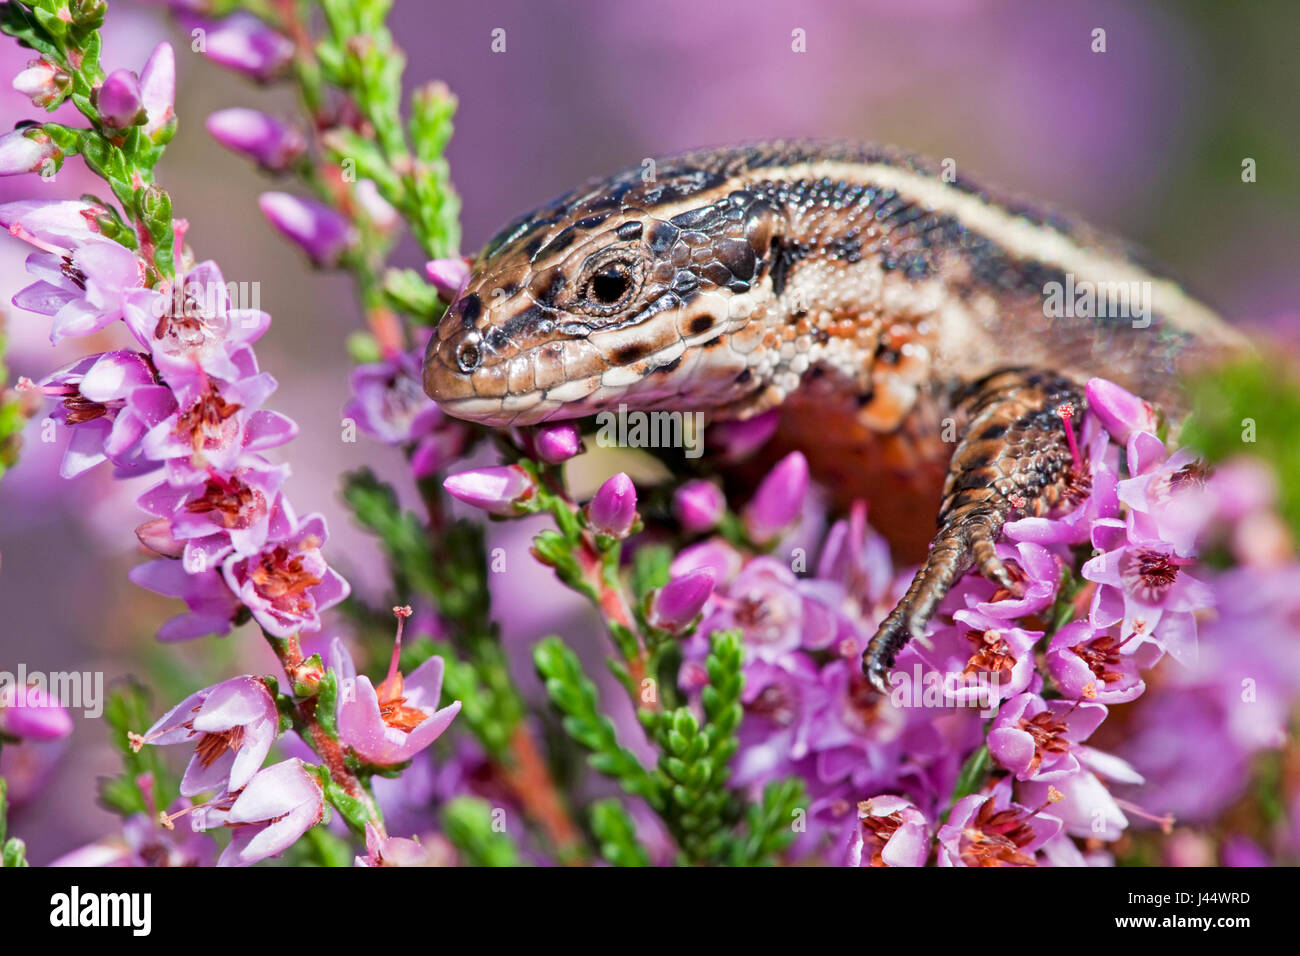 photo of a male common lizard basking on top of flowering heather Stock Photo